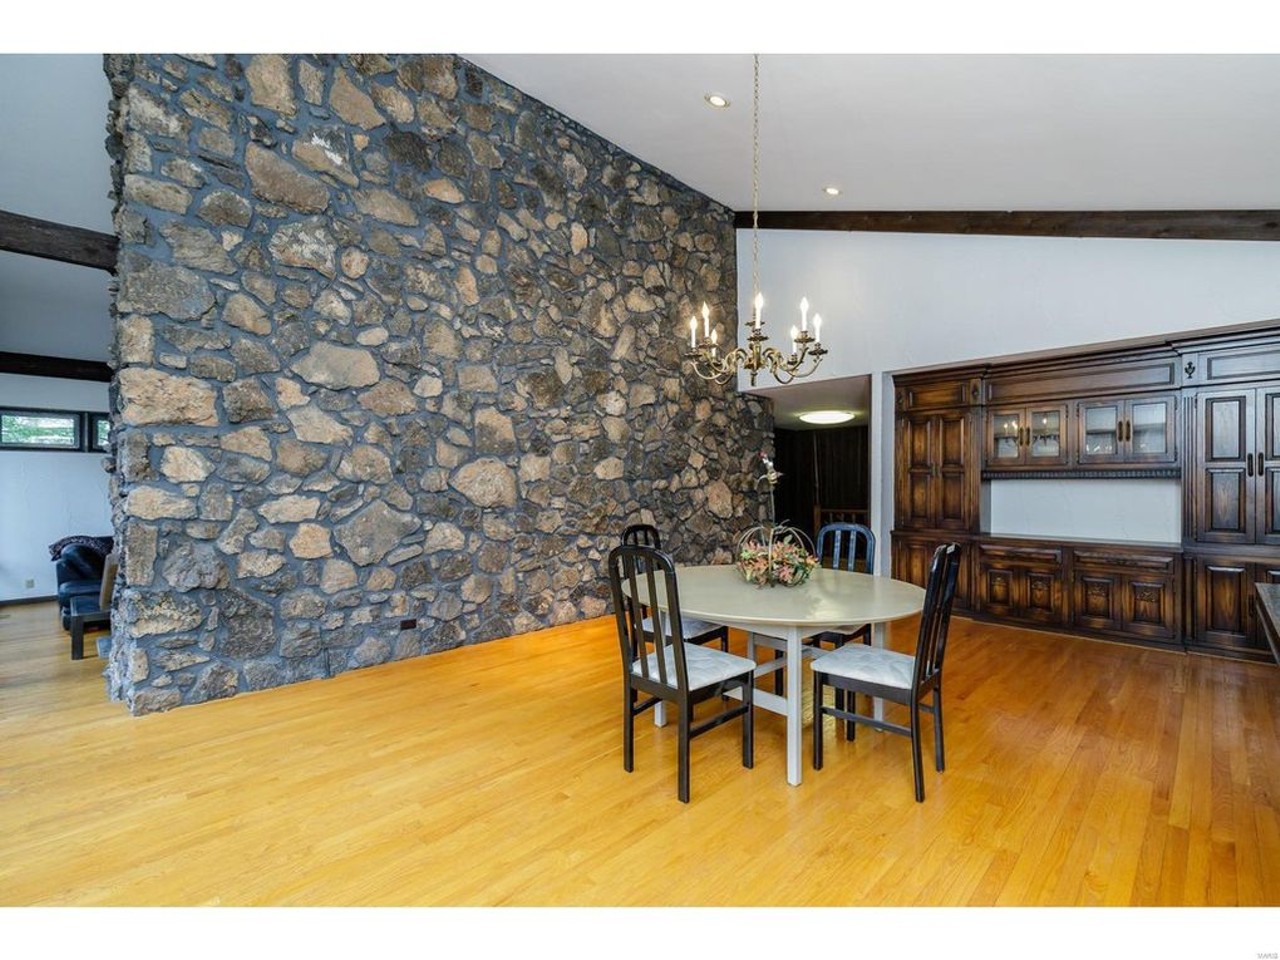 This Modern House Has a Rock Wall and a Huge Bar in the Basement [PHOTOS]